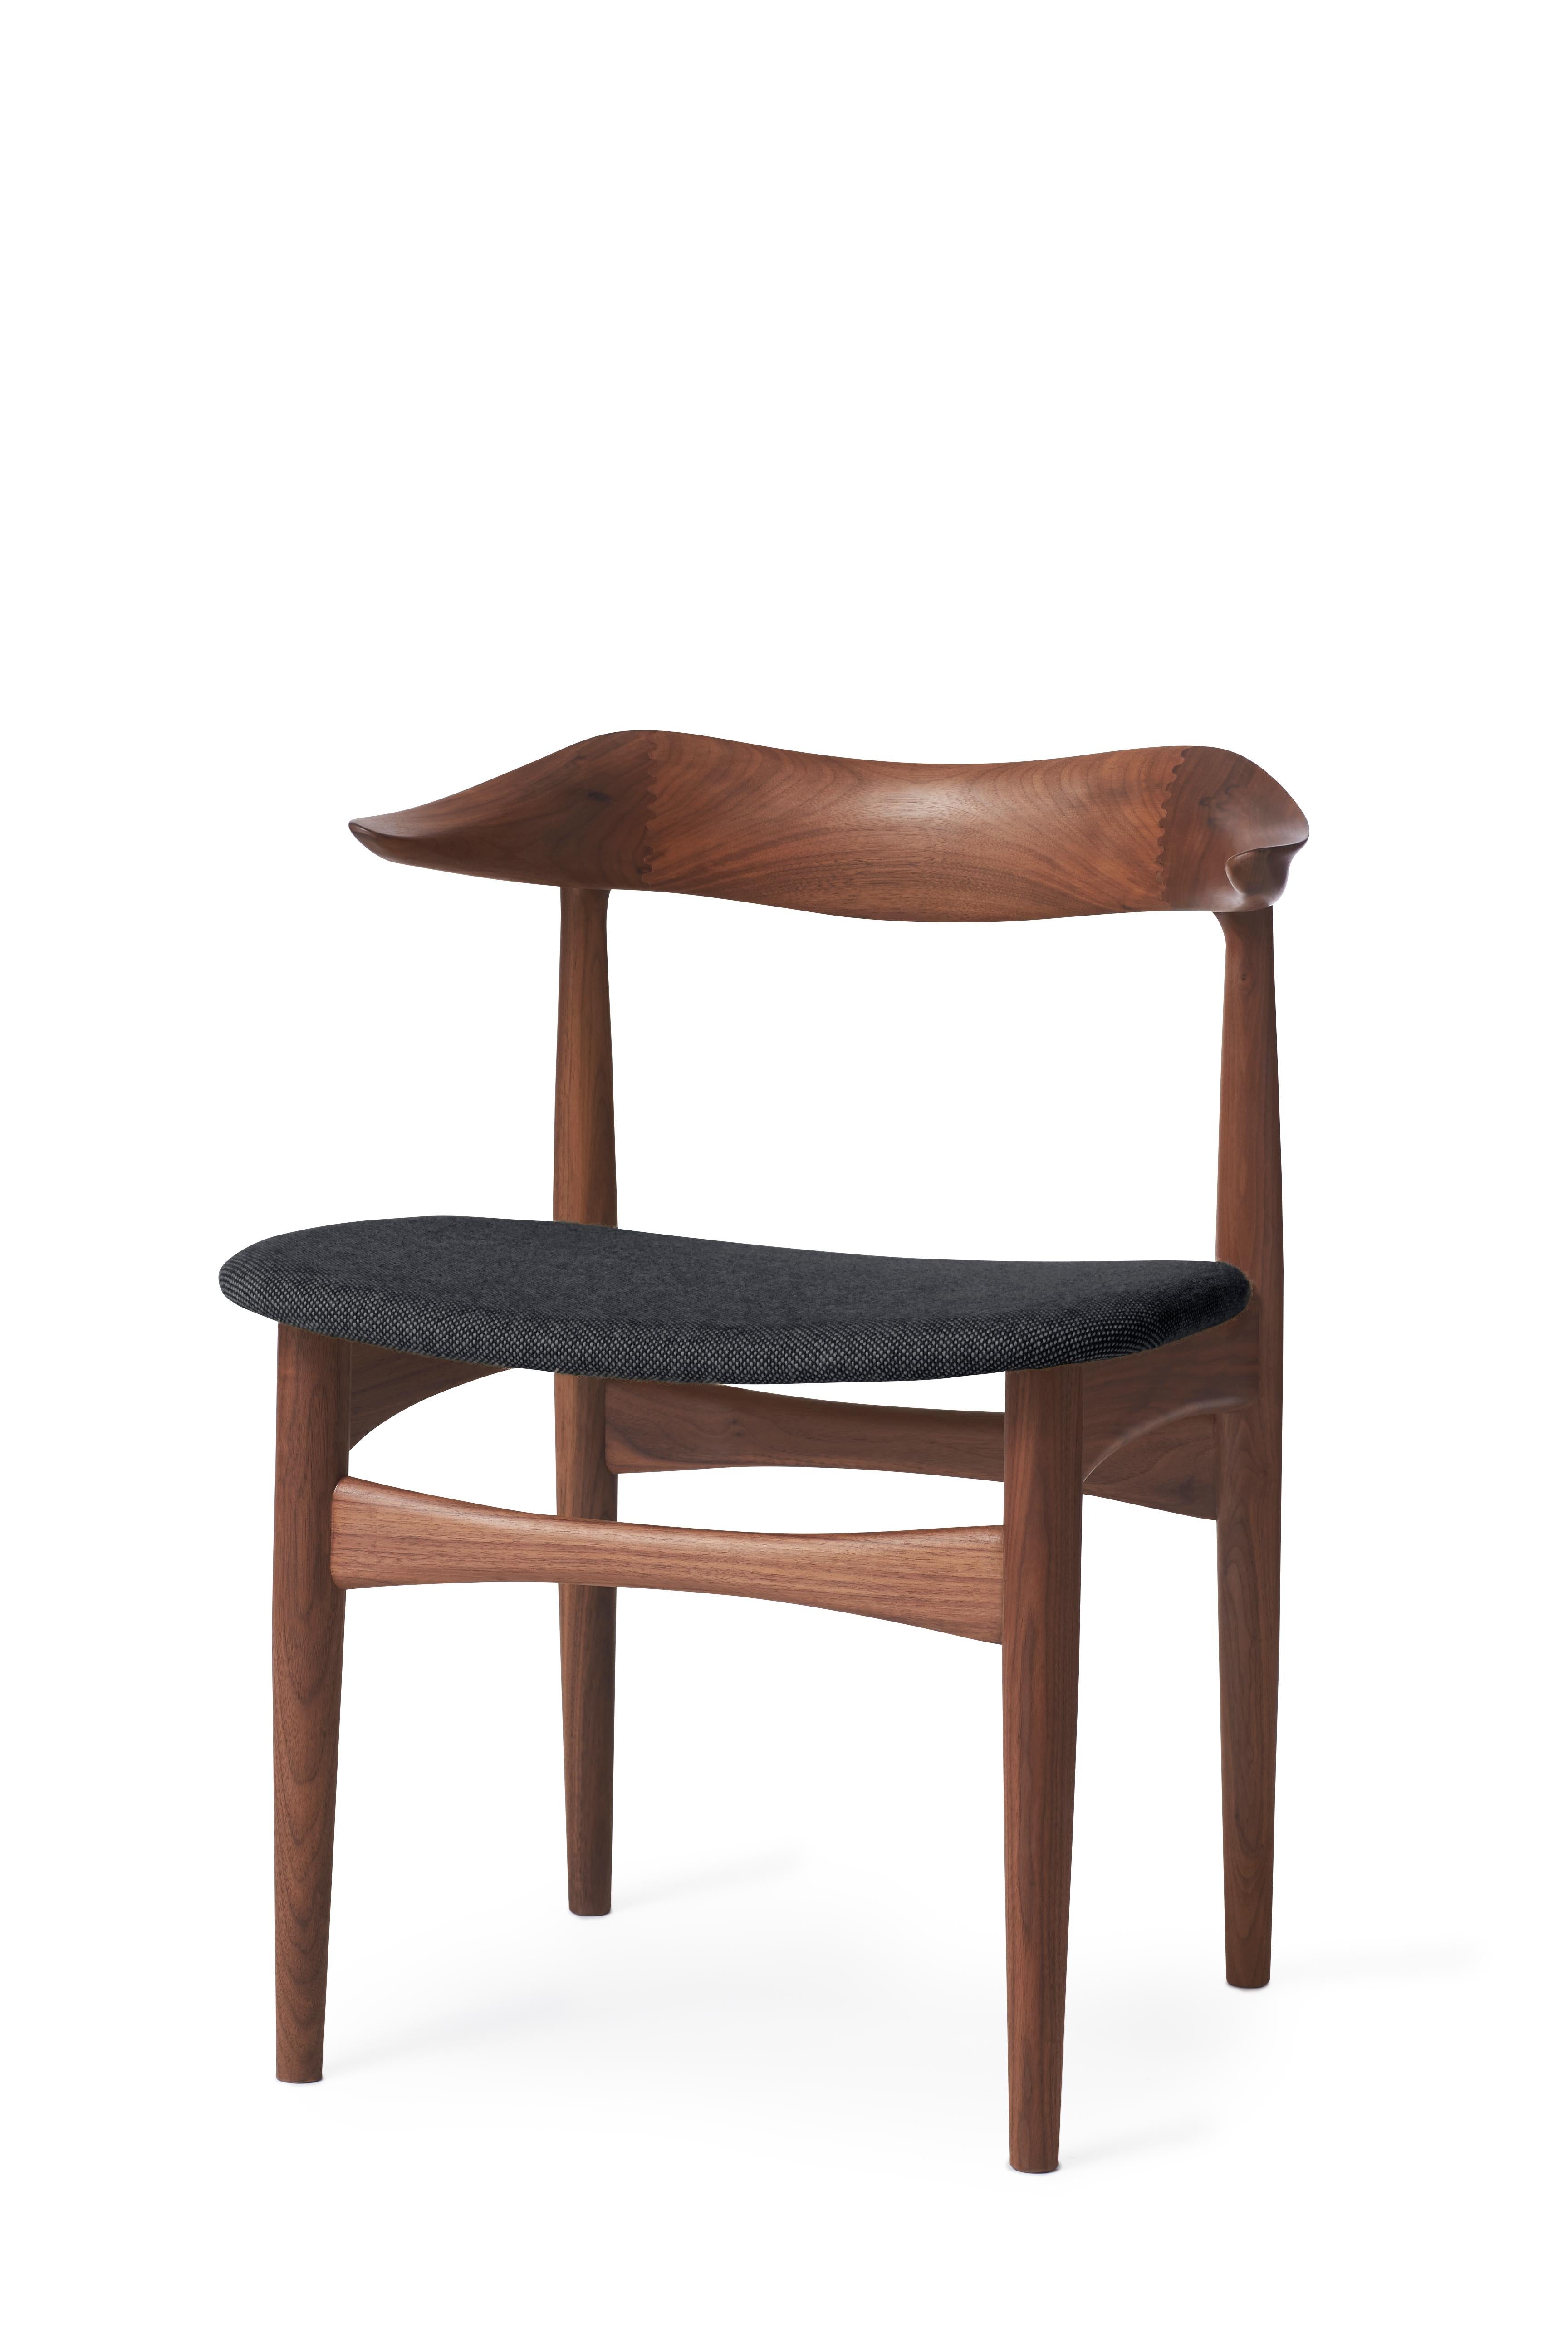 For Sale: Black (Hallingdal 180) Cow Horn Walnut Chair, by Knud Færch from Warm Nordic 2